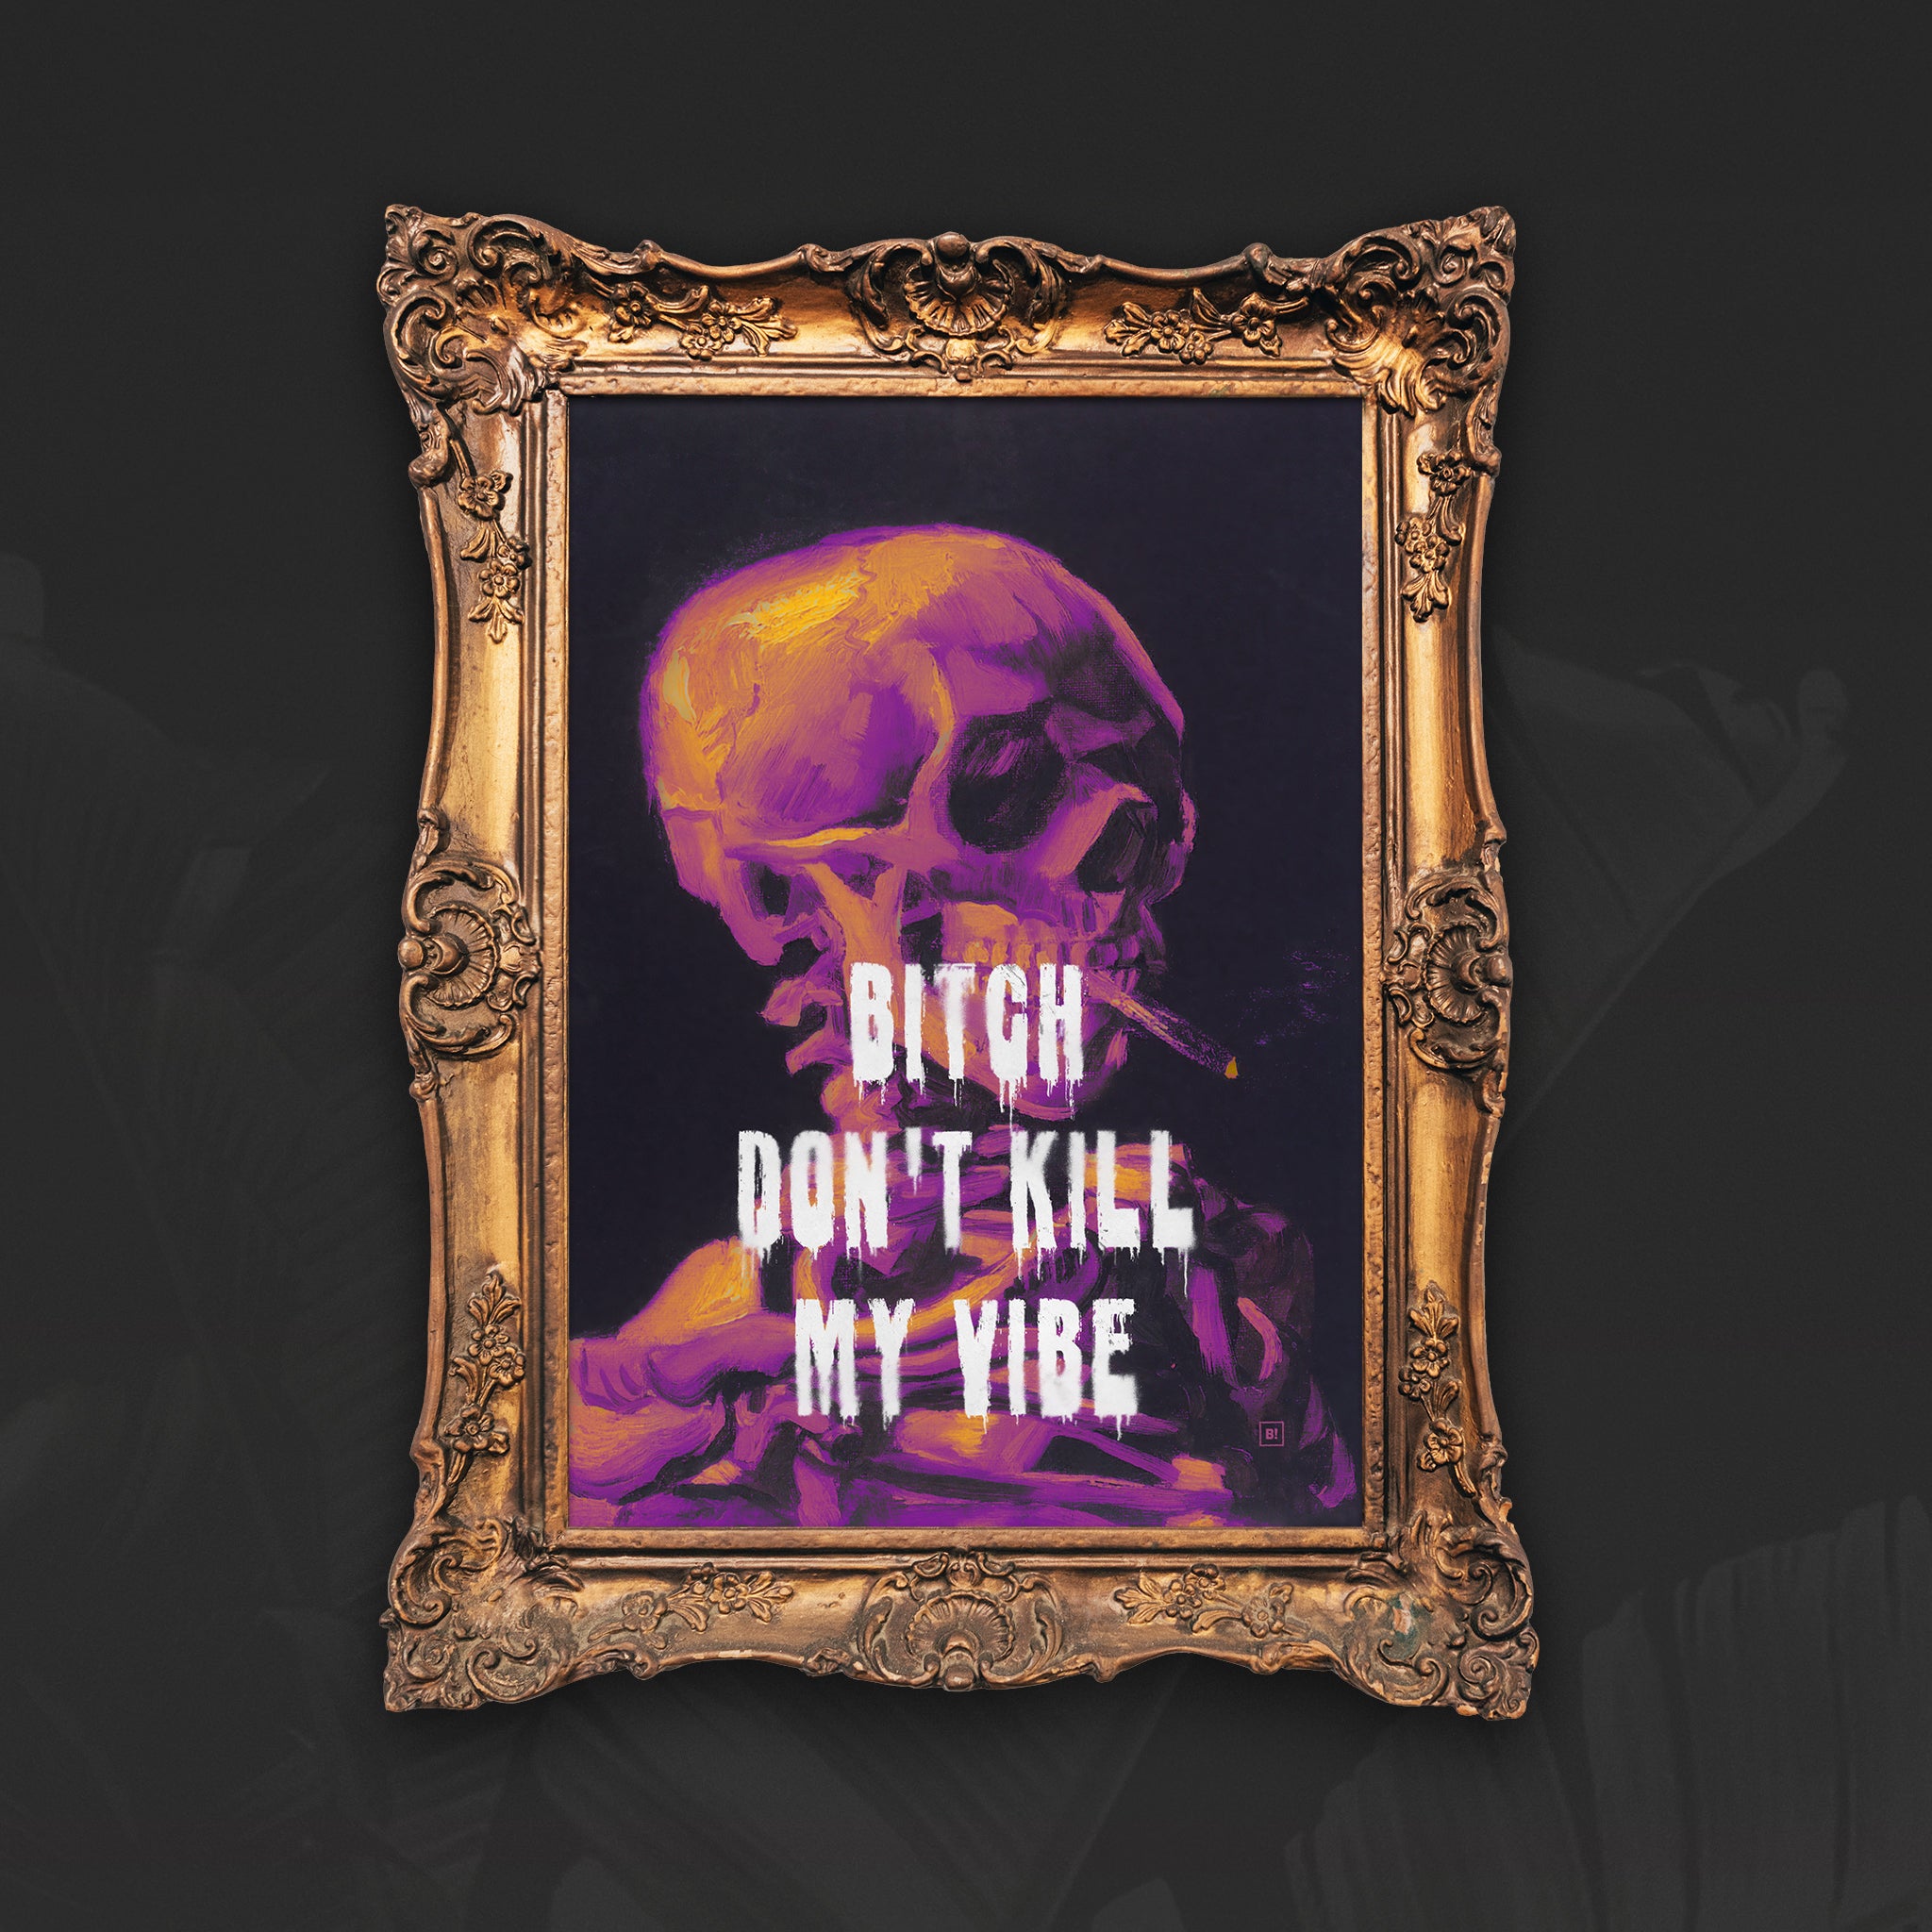 Be inspired by our altered Van Gogh's Bitch Don't Kill My Vibe art print. This artwork has been printed using the giclée process on archival acid-free paper and is presented in a golden vintage frame that captures its timeless beauty in every detail.